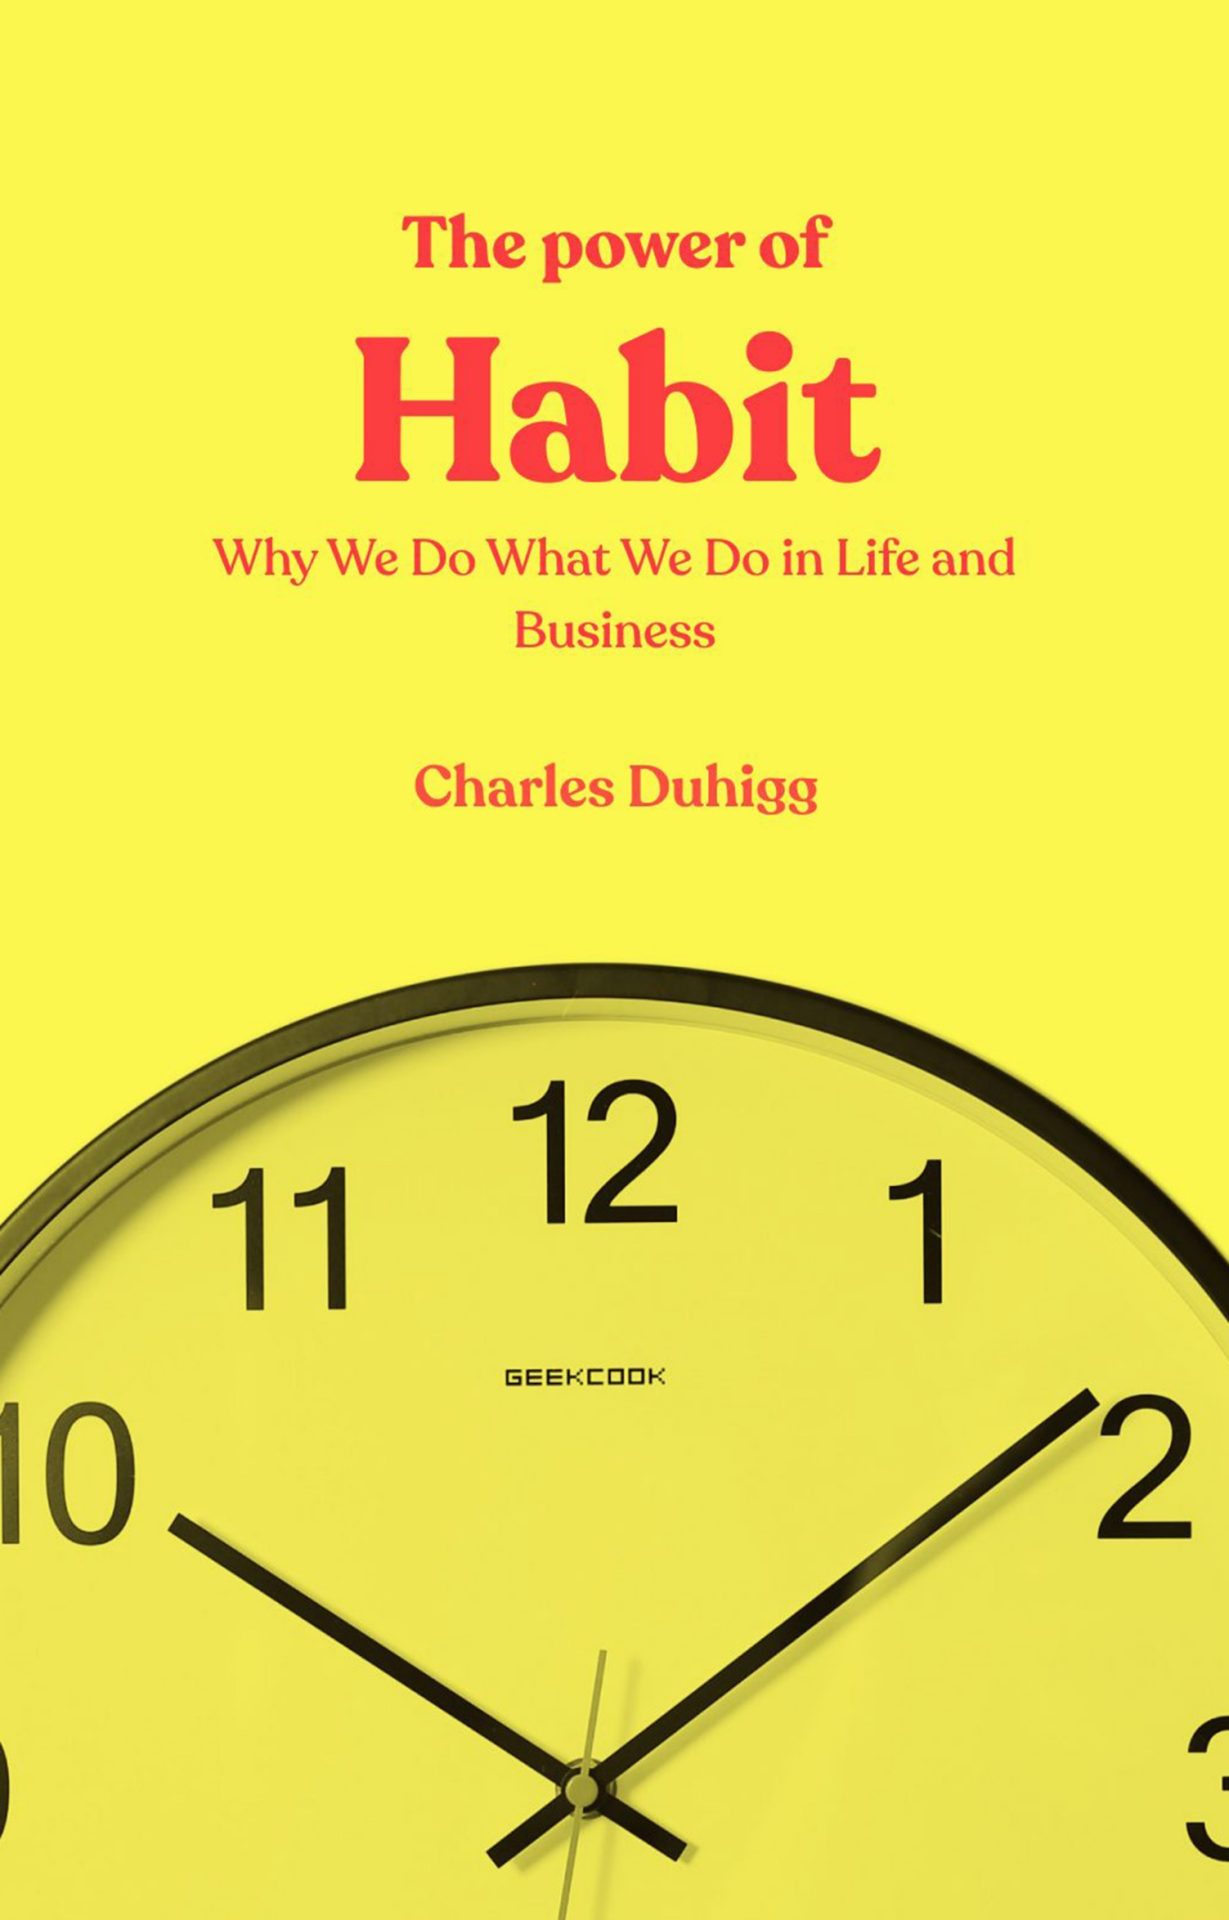 Book cover of The Power of Habit - Charles Duhigg